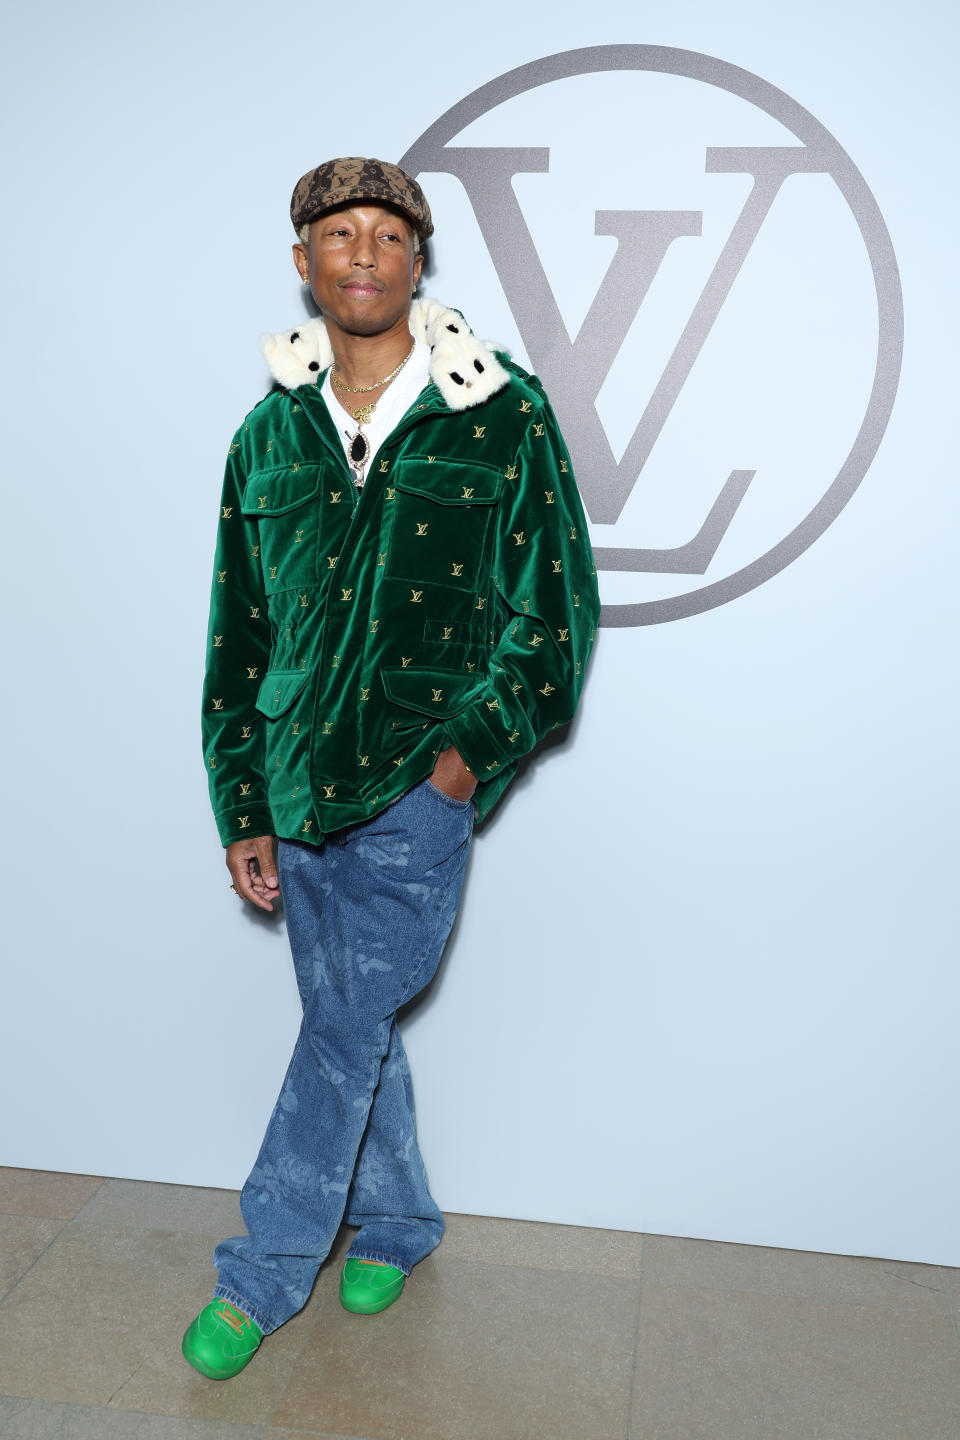 PARIS, FRANCE - MARCH 06: Men's Creative Director of Louis Vuitton, Pharrell Williams attends the Louis Vuitton Womenswear Fall Winter 2023-2024 show as part of Paris Fashion Week  on March 06, 2023 in Paris, France. (Photo by Pascal Le Segretain/Getty Images for Louis Vuitton)